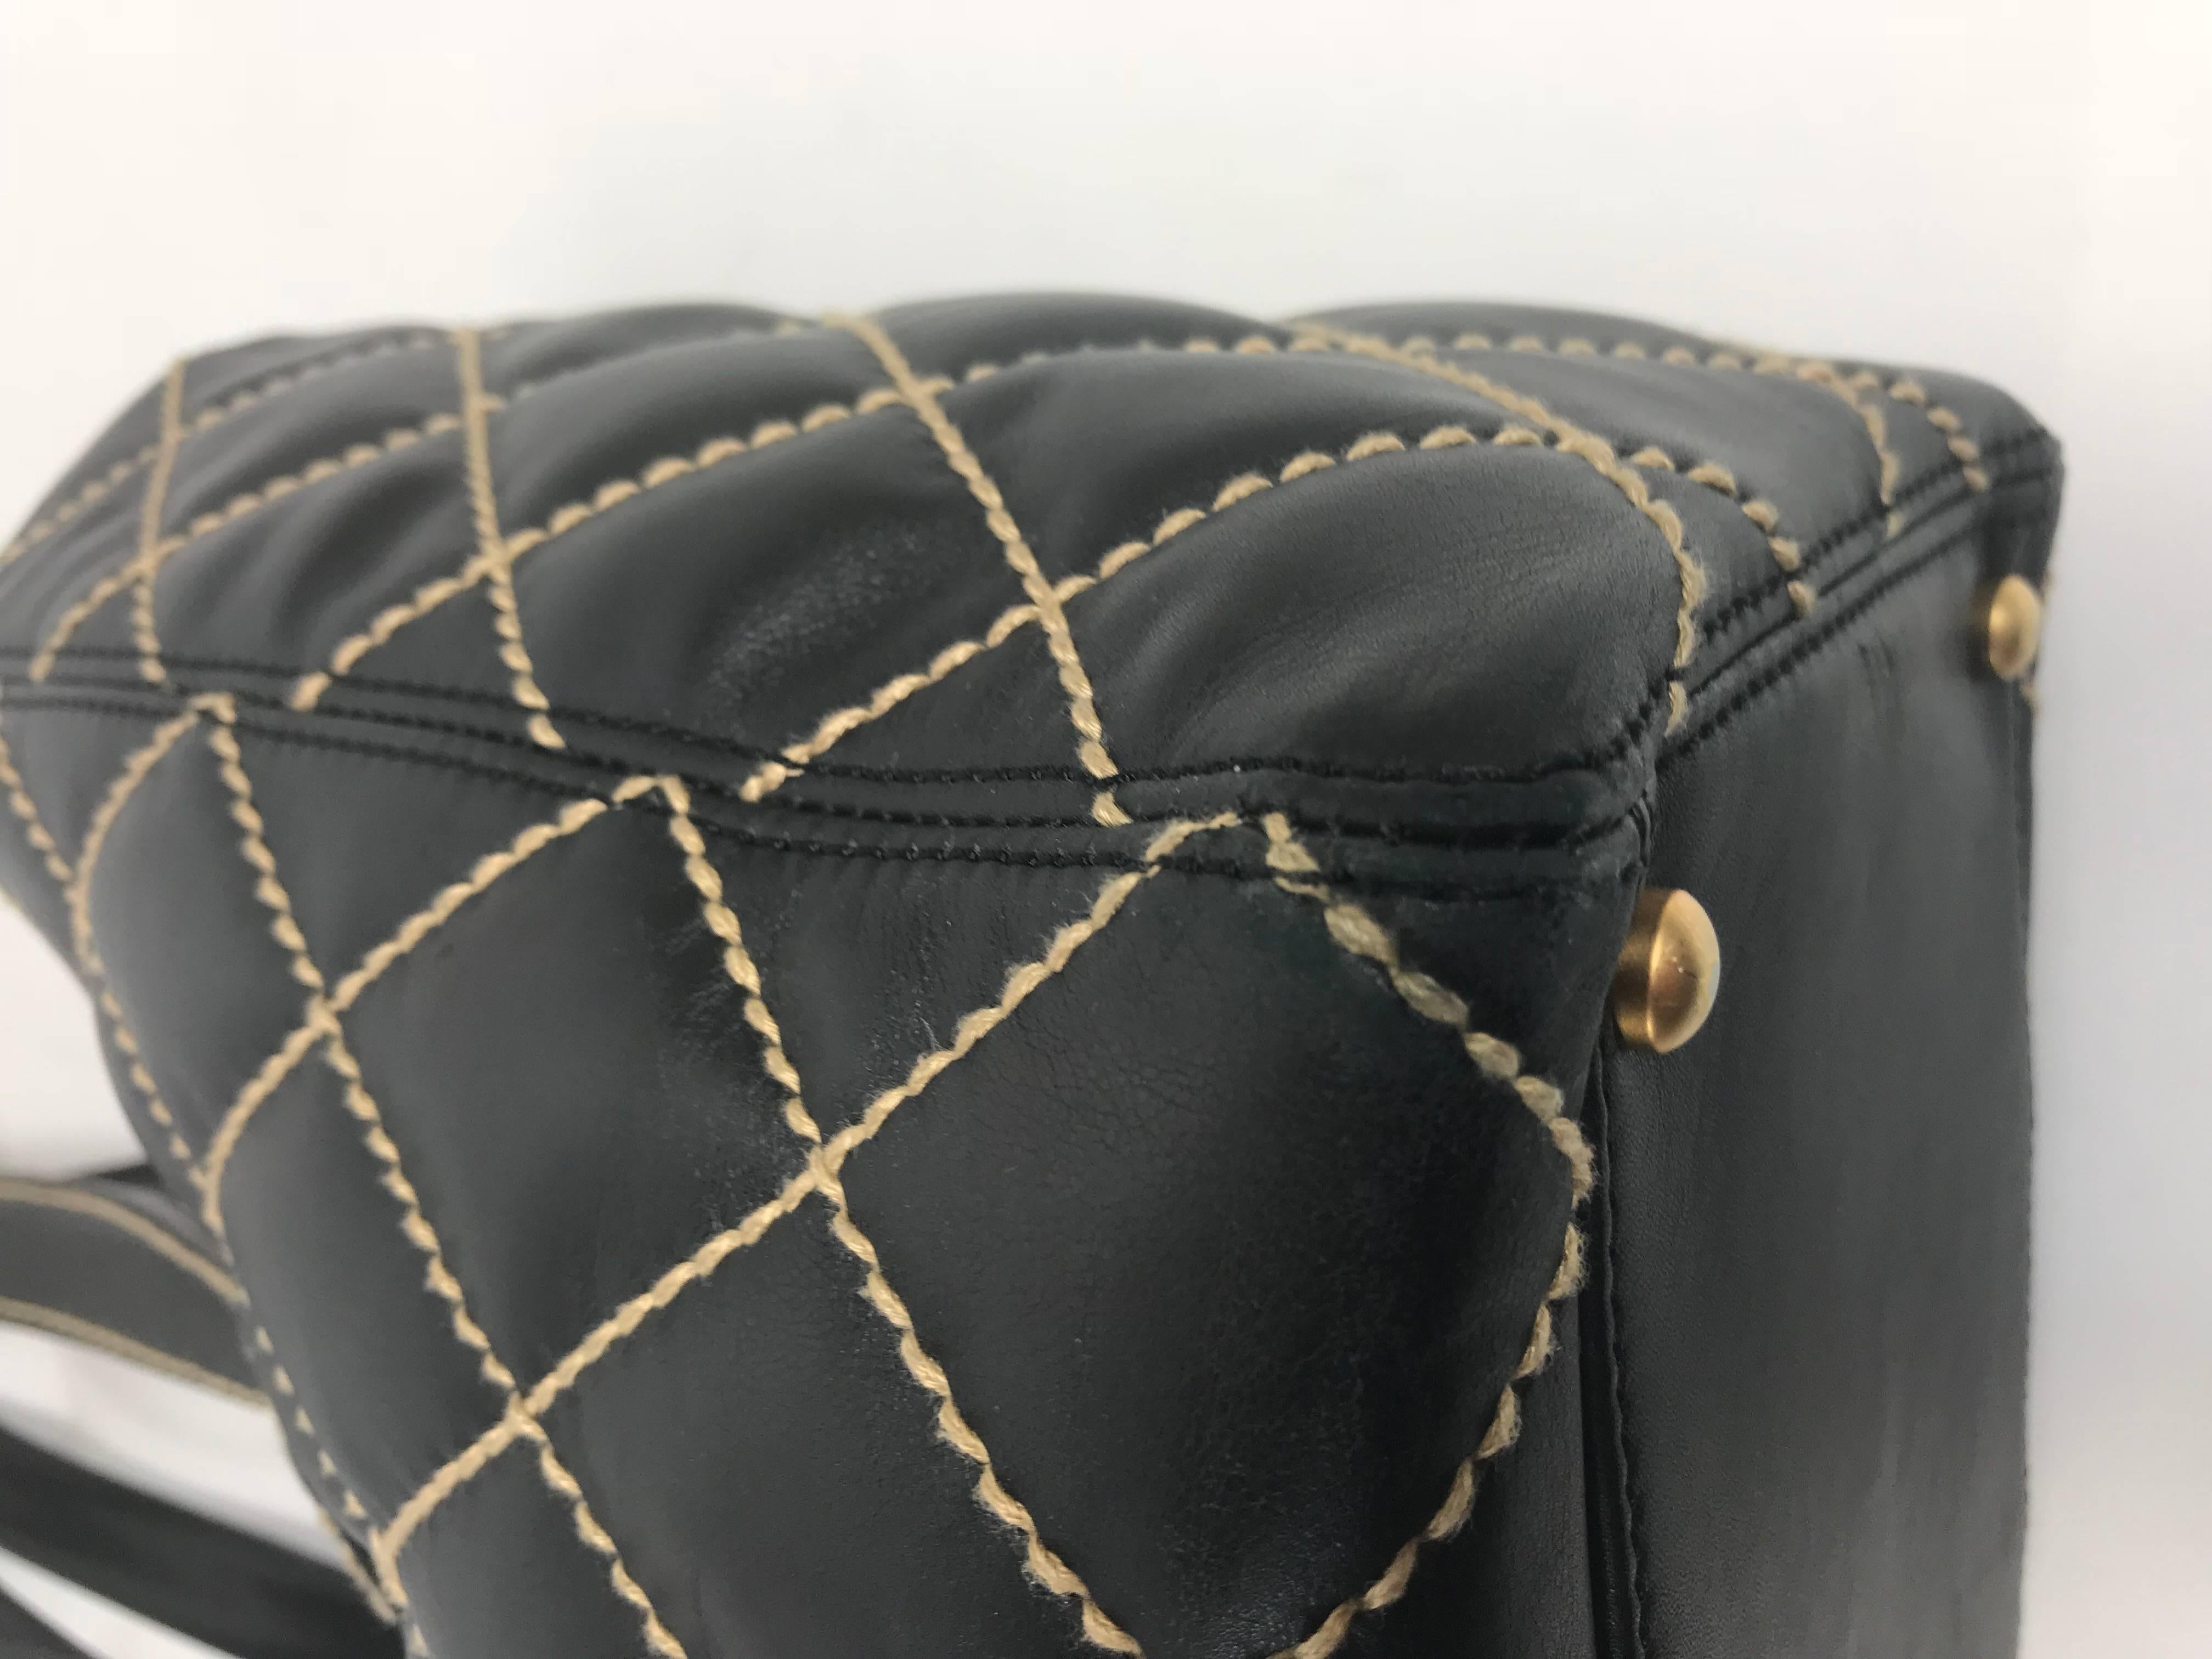 Chanel Quilted Leather Wild Stitch Tote in Black Tote Bag 1